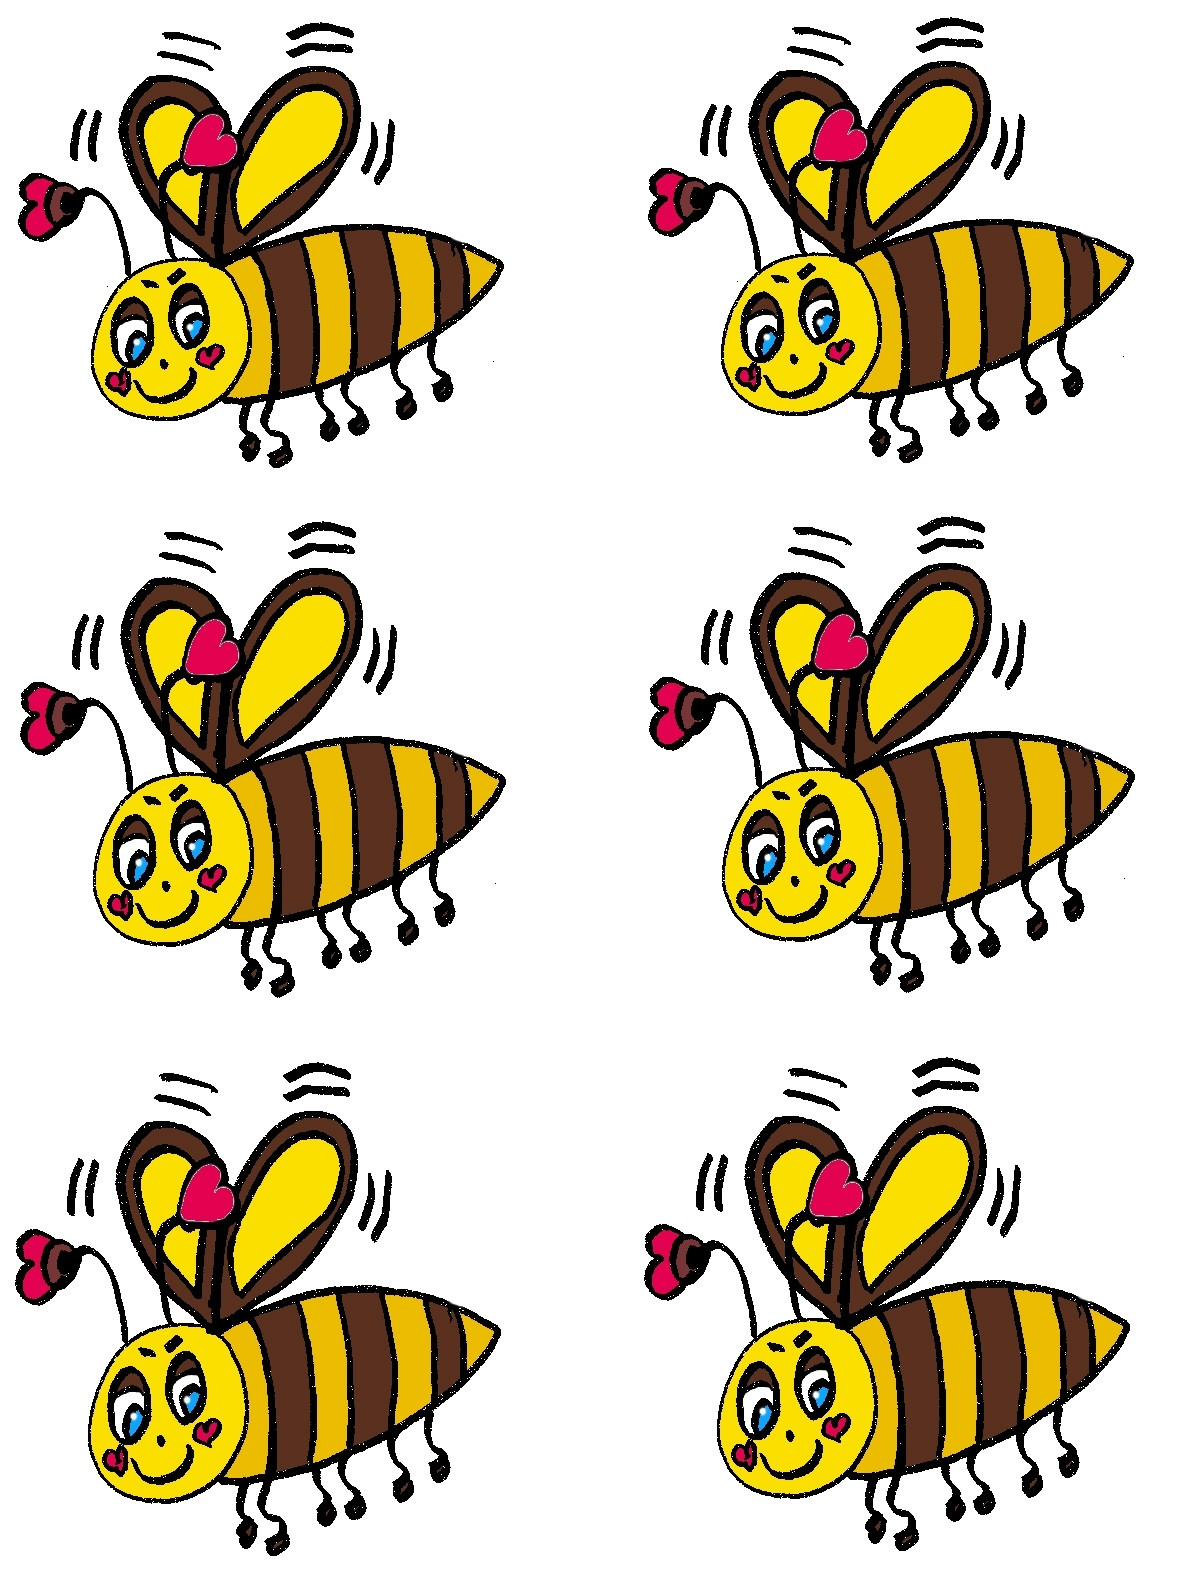 Christian Images In My Treasure Box: Home Drawn Cartoon Bees 